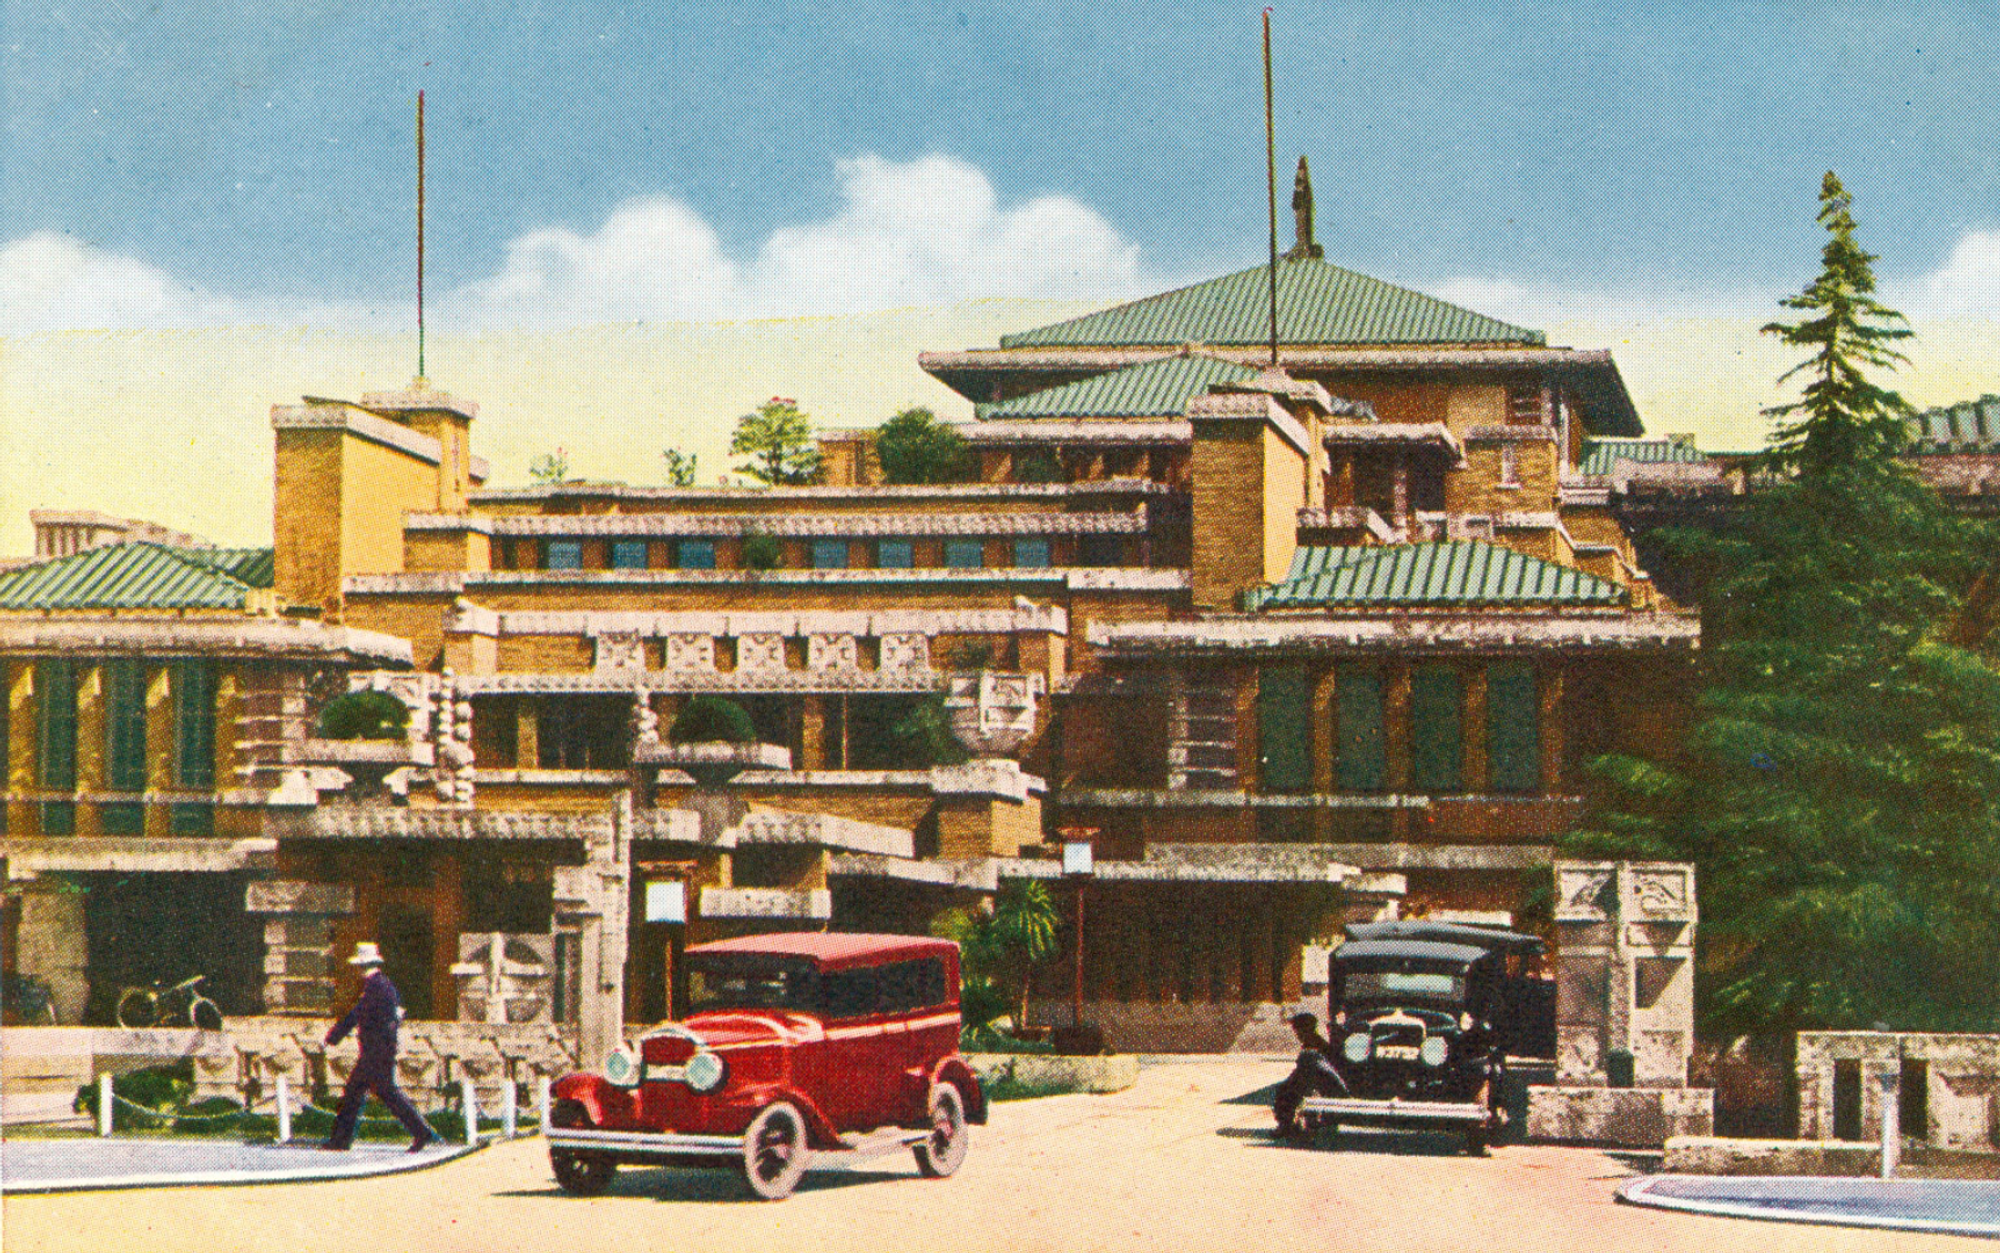 A Virtual Tour of Frank Lloyd Wright’s Lost Japanese Masterpiece, the Imperial Hotel in Tokyo
